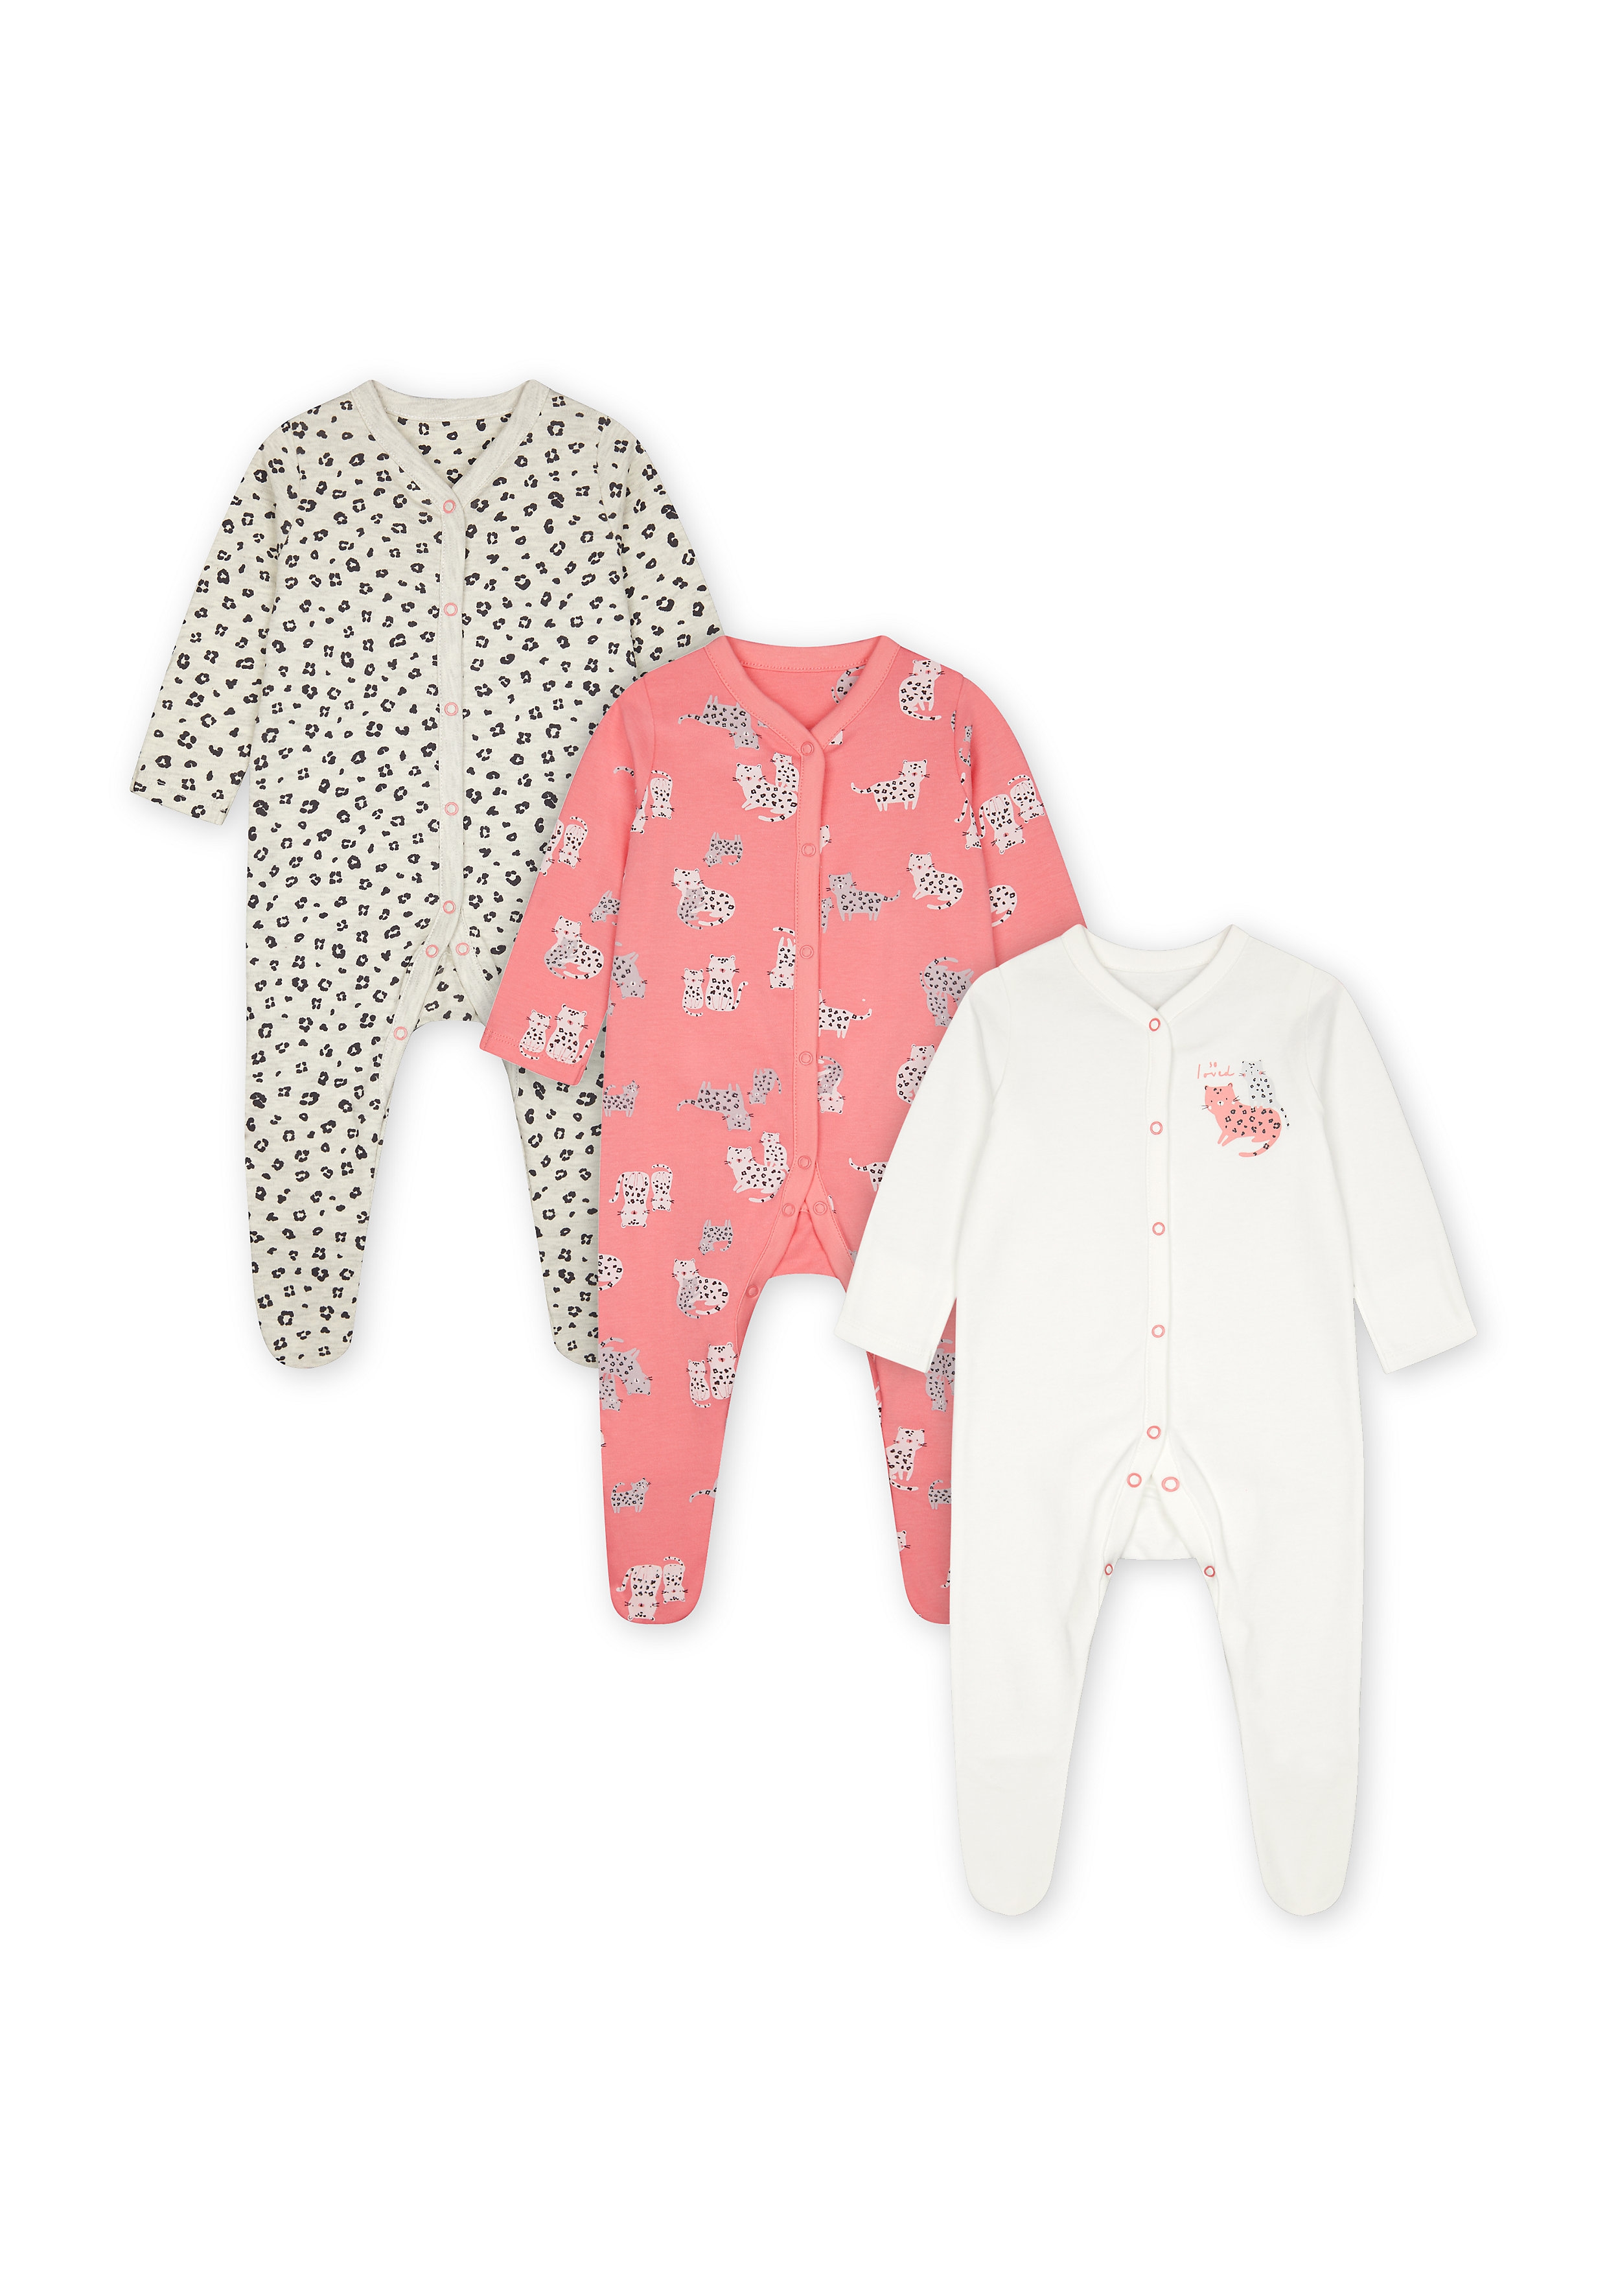 Mothercare | Girls Full Sleeves Sleepsuits  - Pack Of 3 - Pink 0